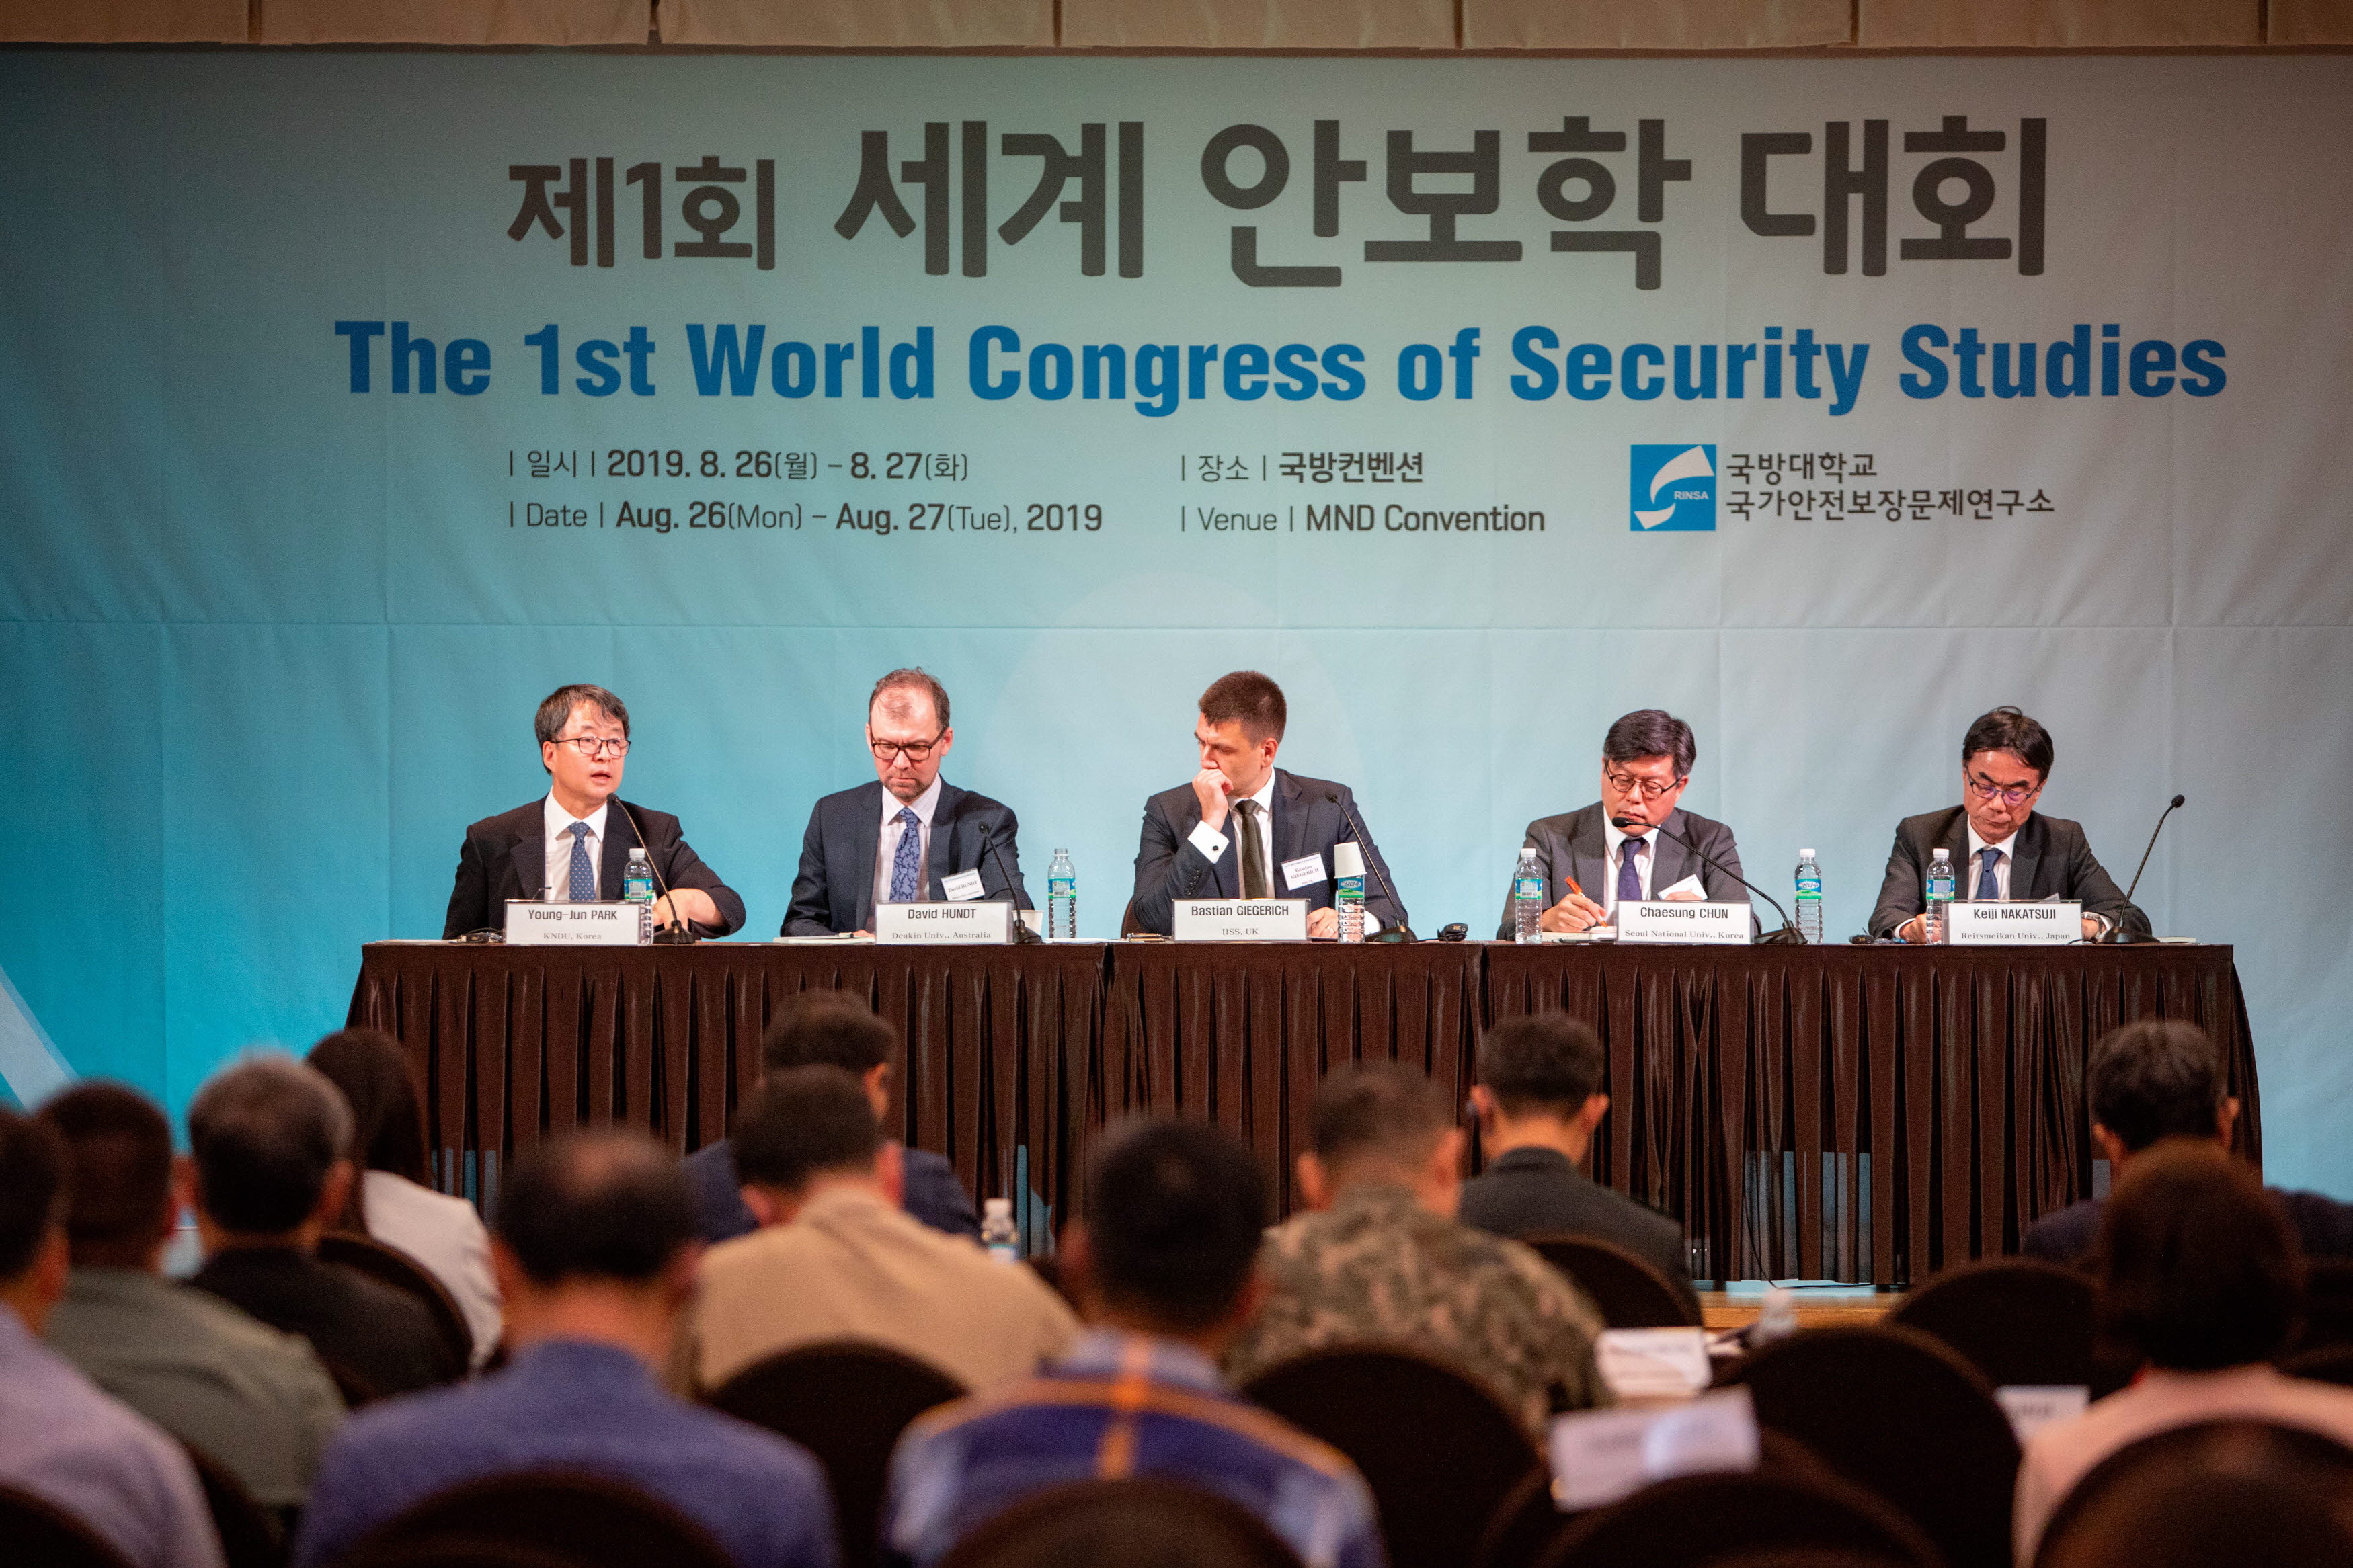 Session #2-2 : East Asian Security: Liberalist’s Perspective